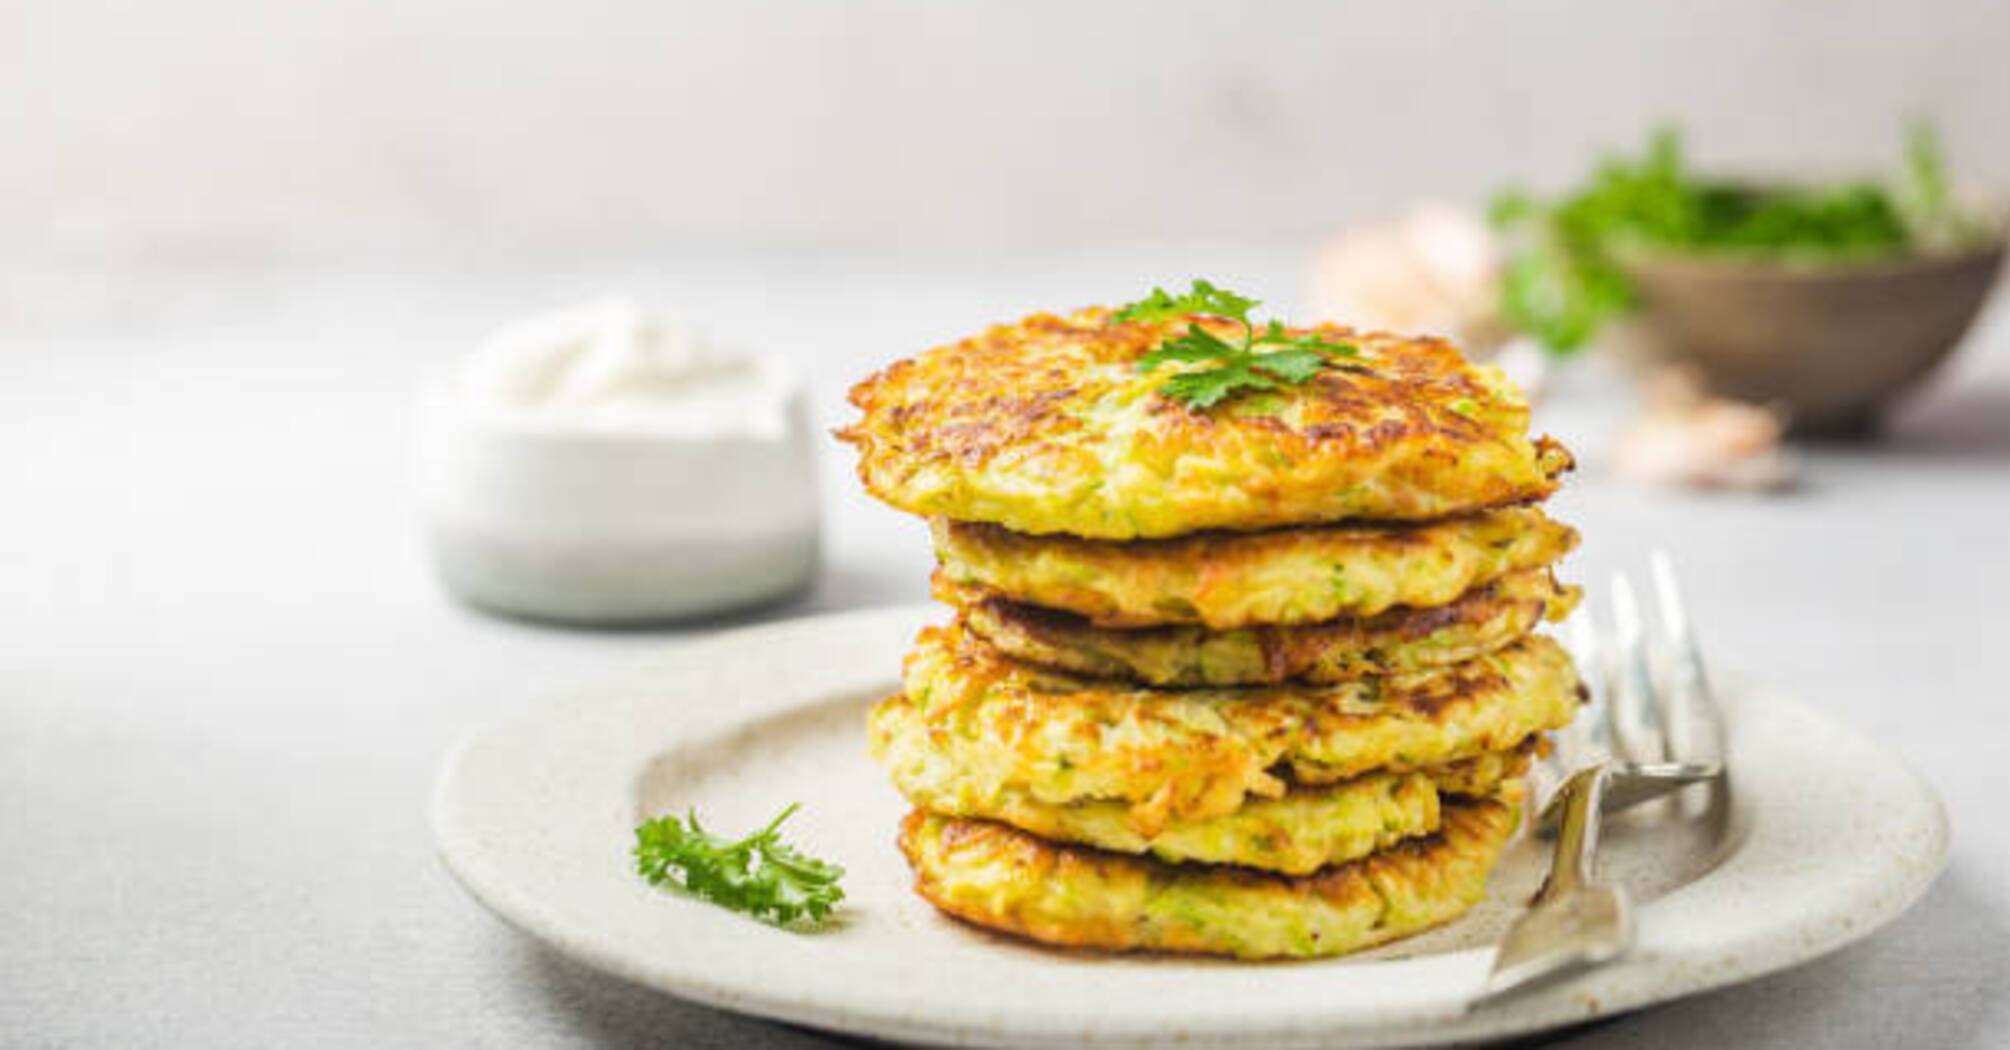 Not only pancakes: what zucchini dish to cook for breakfast in combination with a secret ingredient